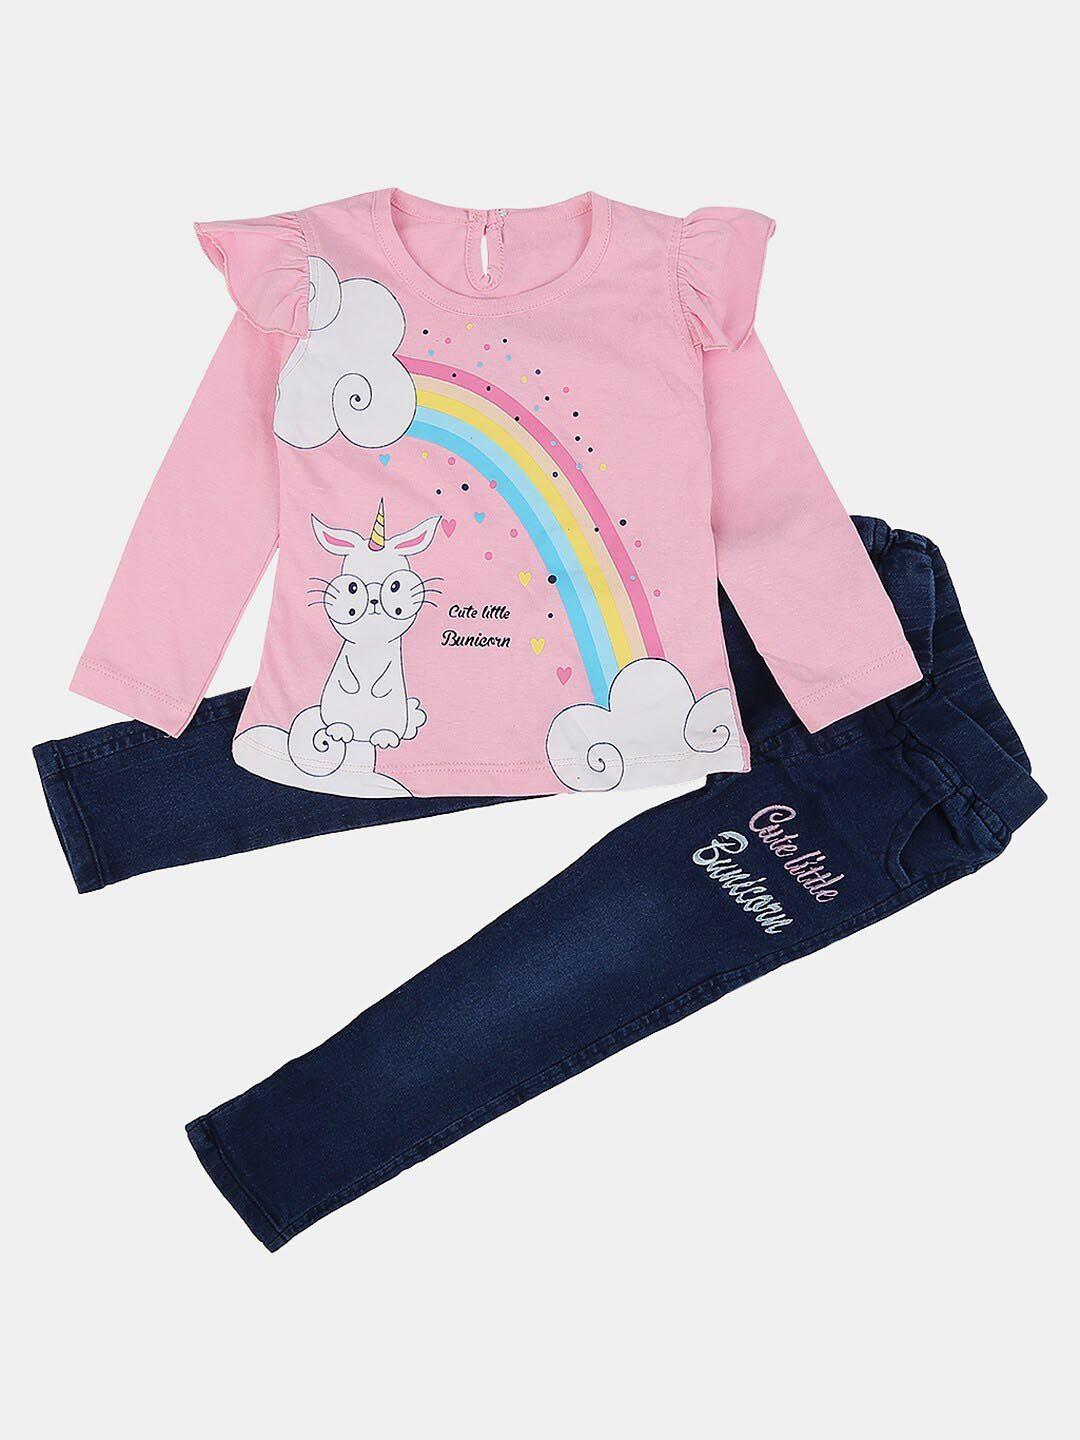 v-mart kids pink & blue printed top with trousers